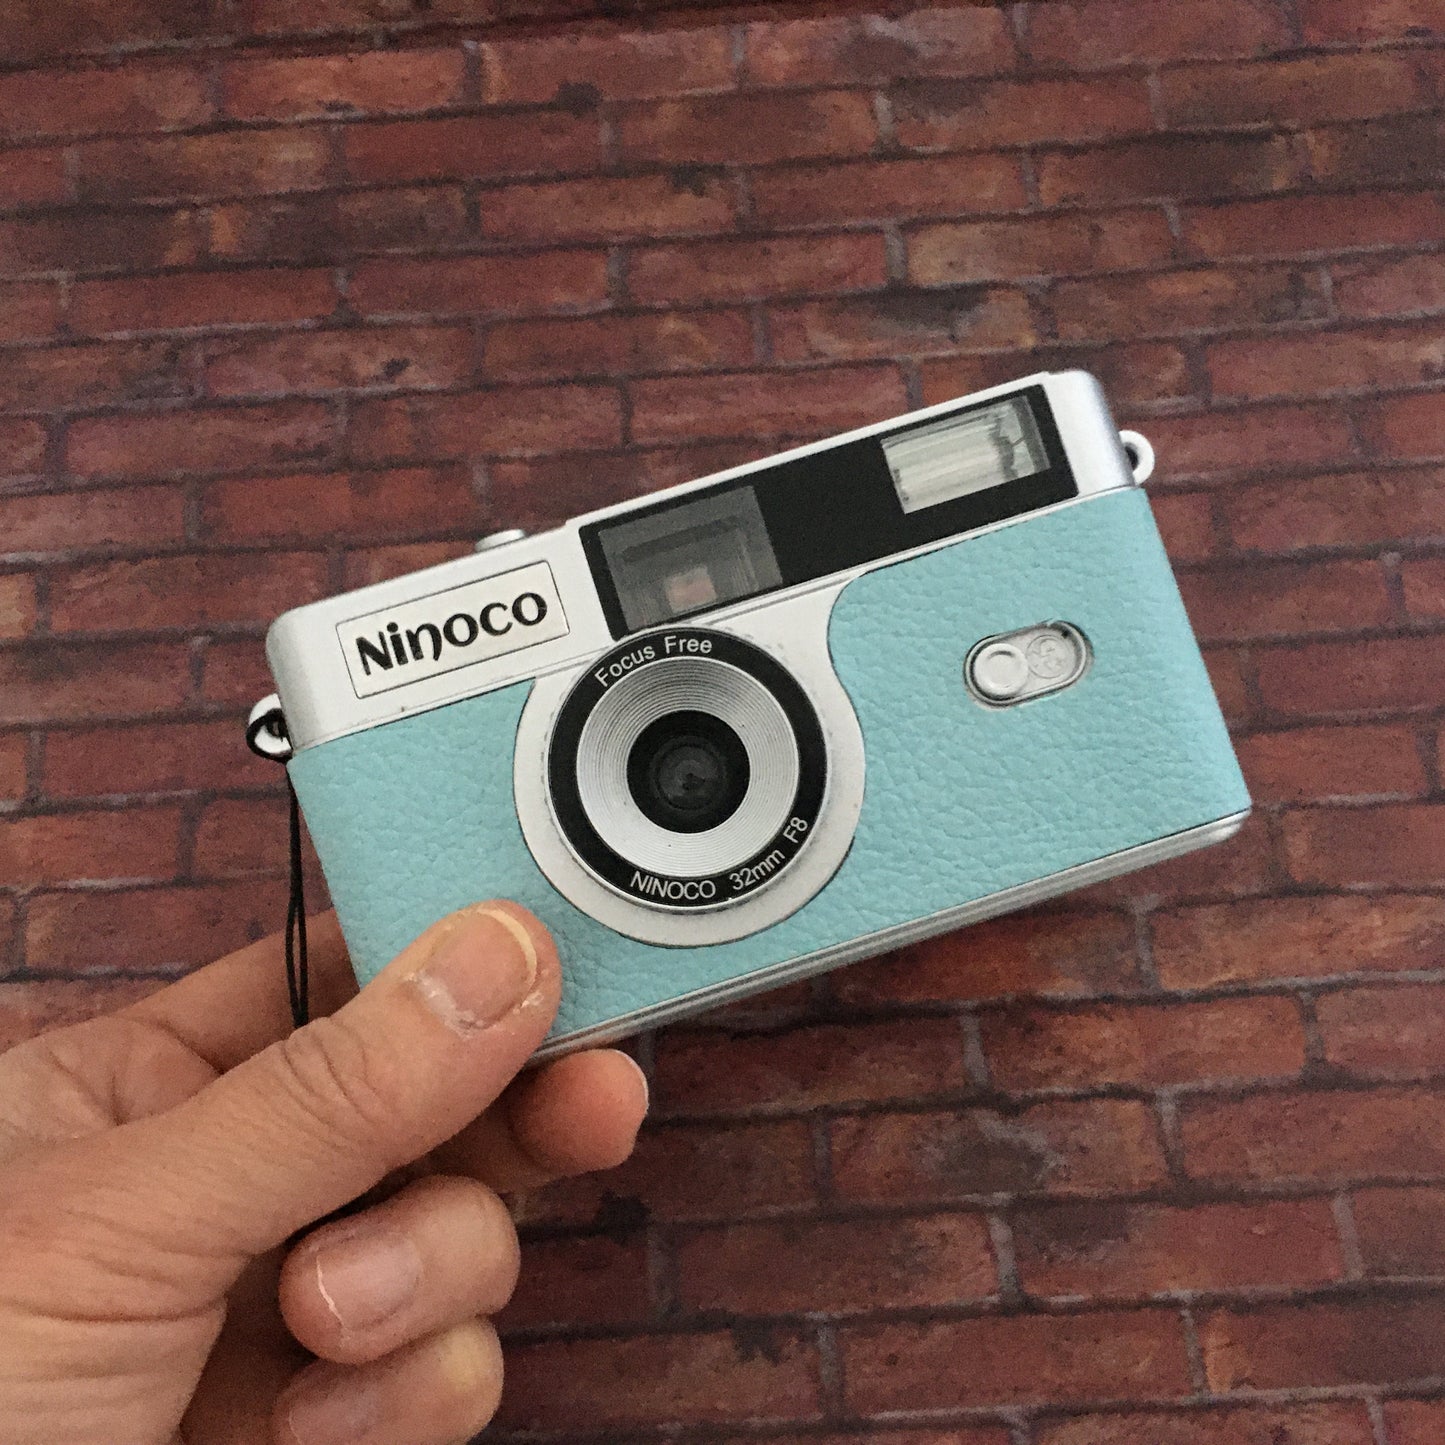 Point & shoot ! Brand new 35mm film camera with mint blue leather